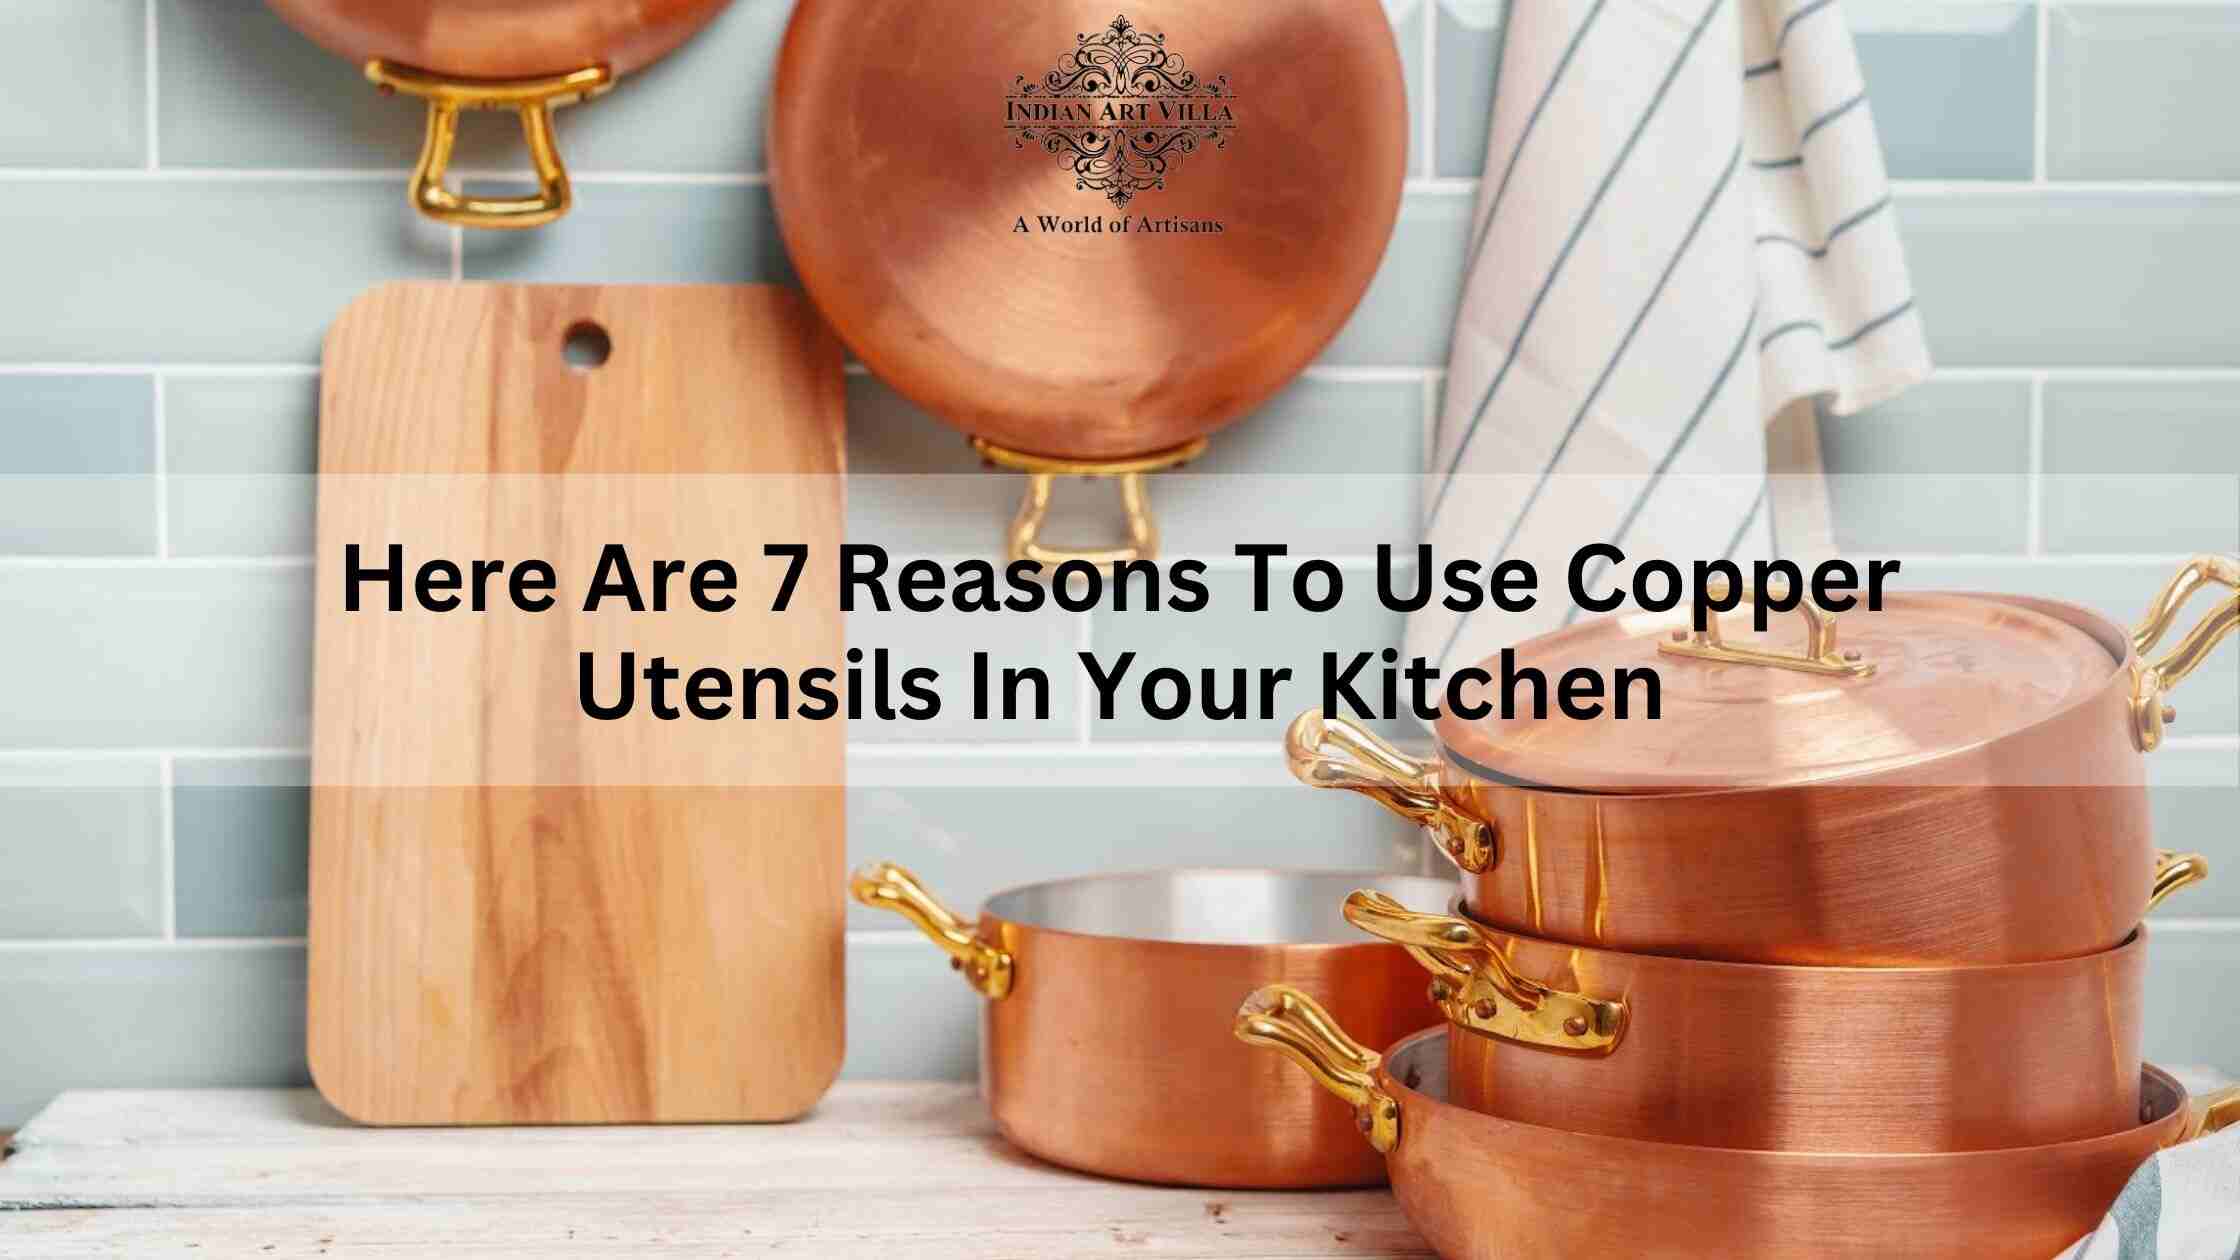 Here Are 7 Reasons To Use Copper (1)